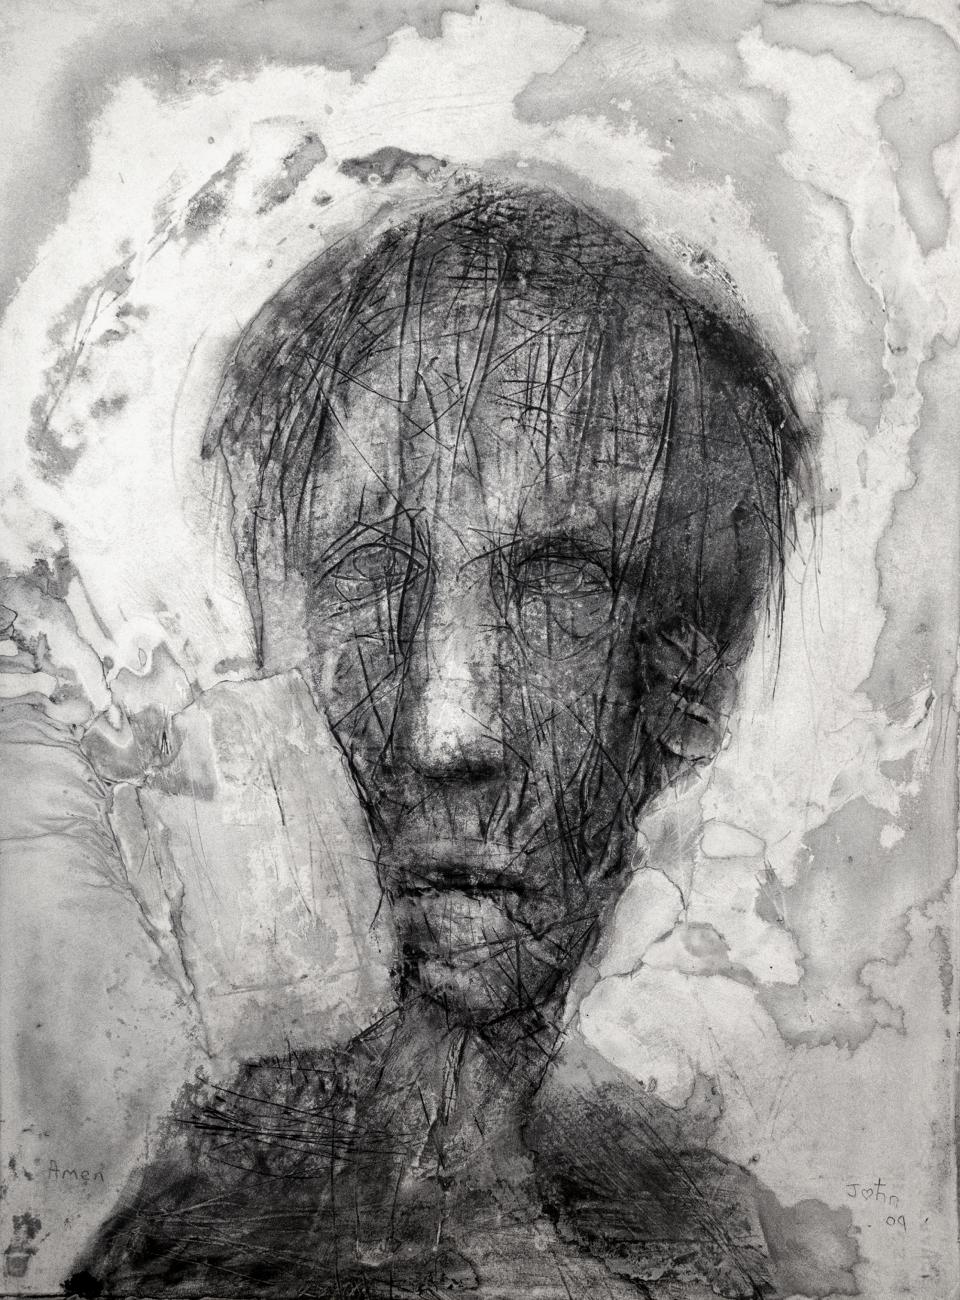 Self portrait - Exhausted   2009  charcoal on paper 77 x 57 cm $3,500 (framed)